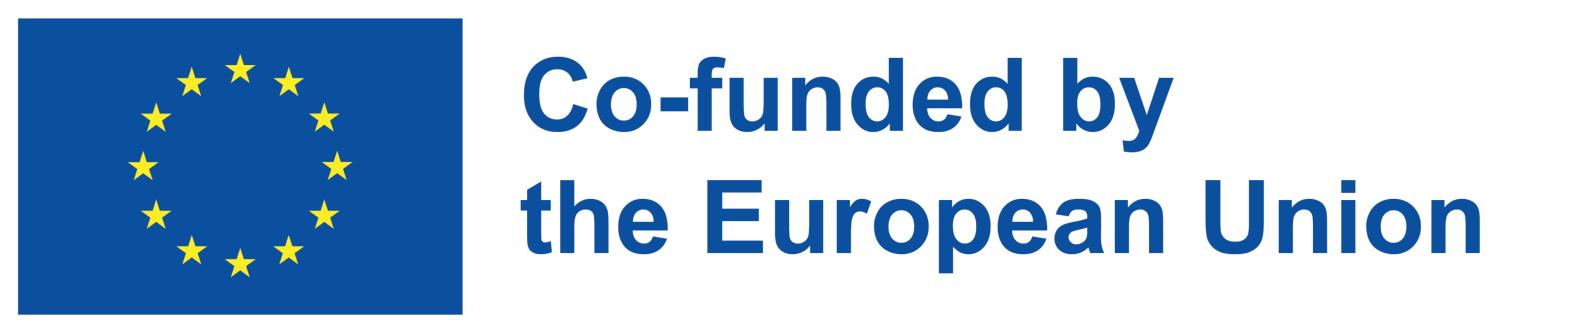 EN Co-funded by the EU_POS (c) Co-funded by the EU